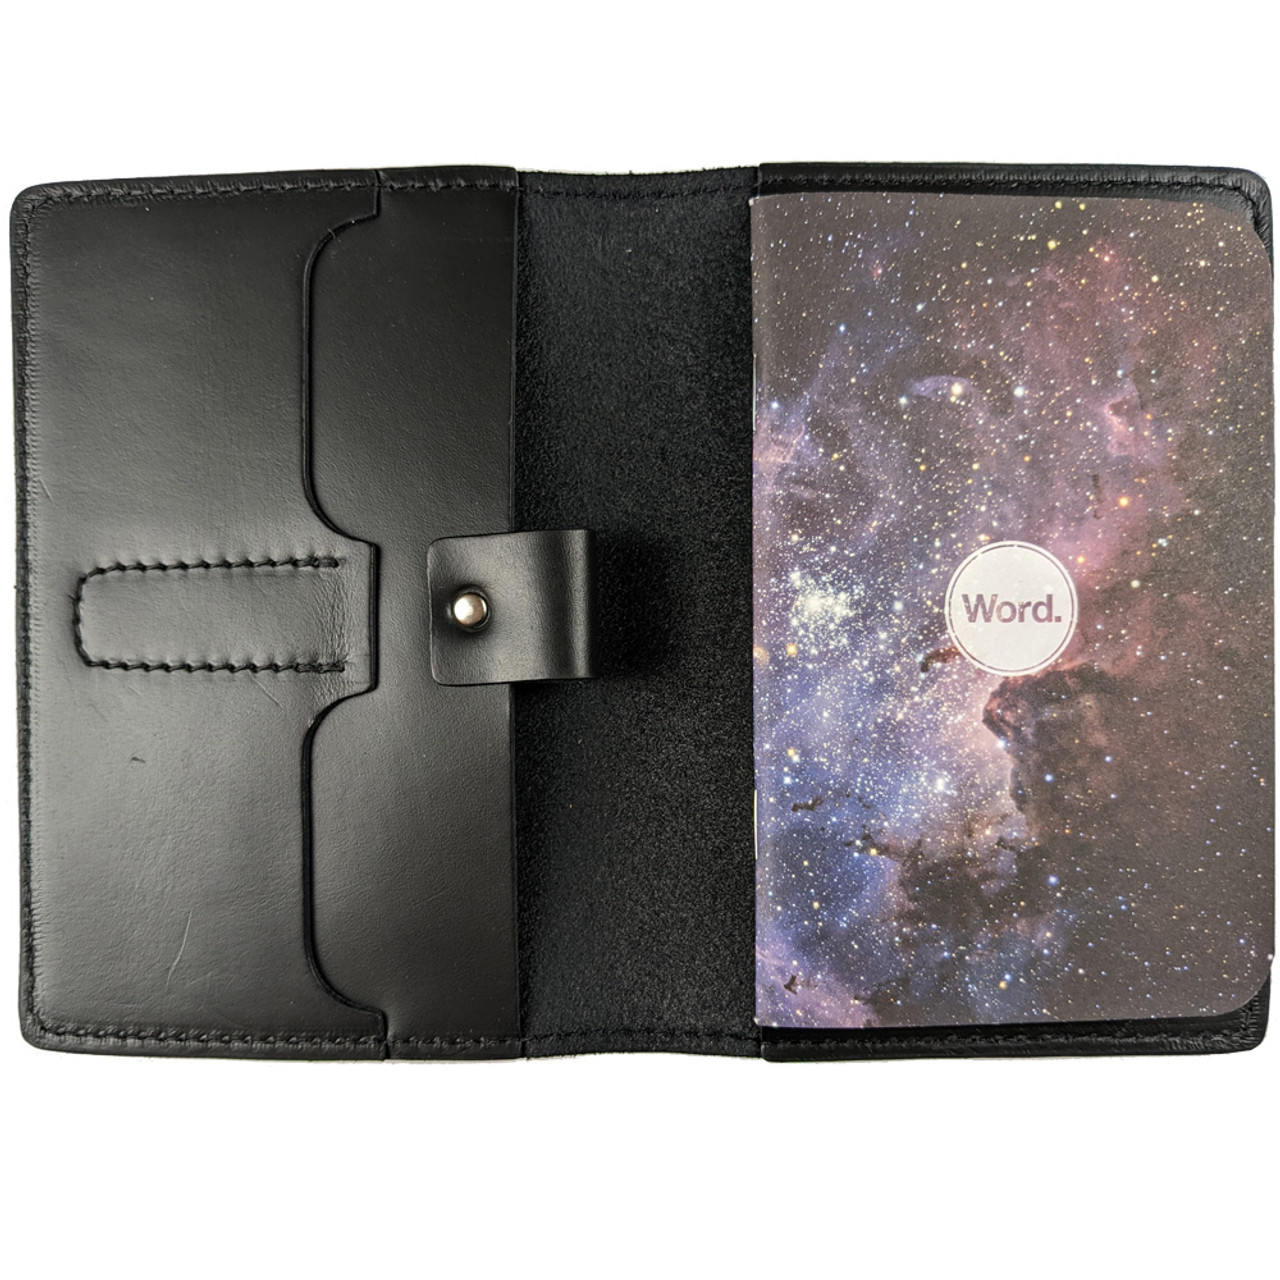 Memo Book Cover in Black Leather from Coal Creek. Fits  Word. Notebooks